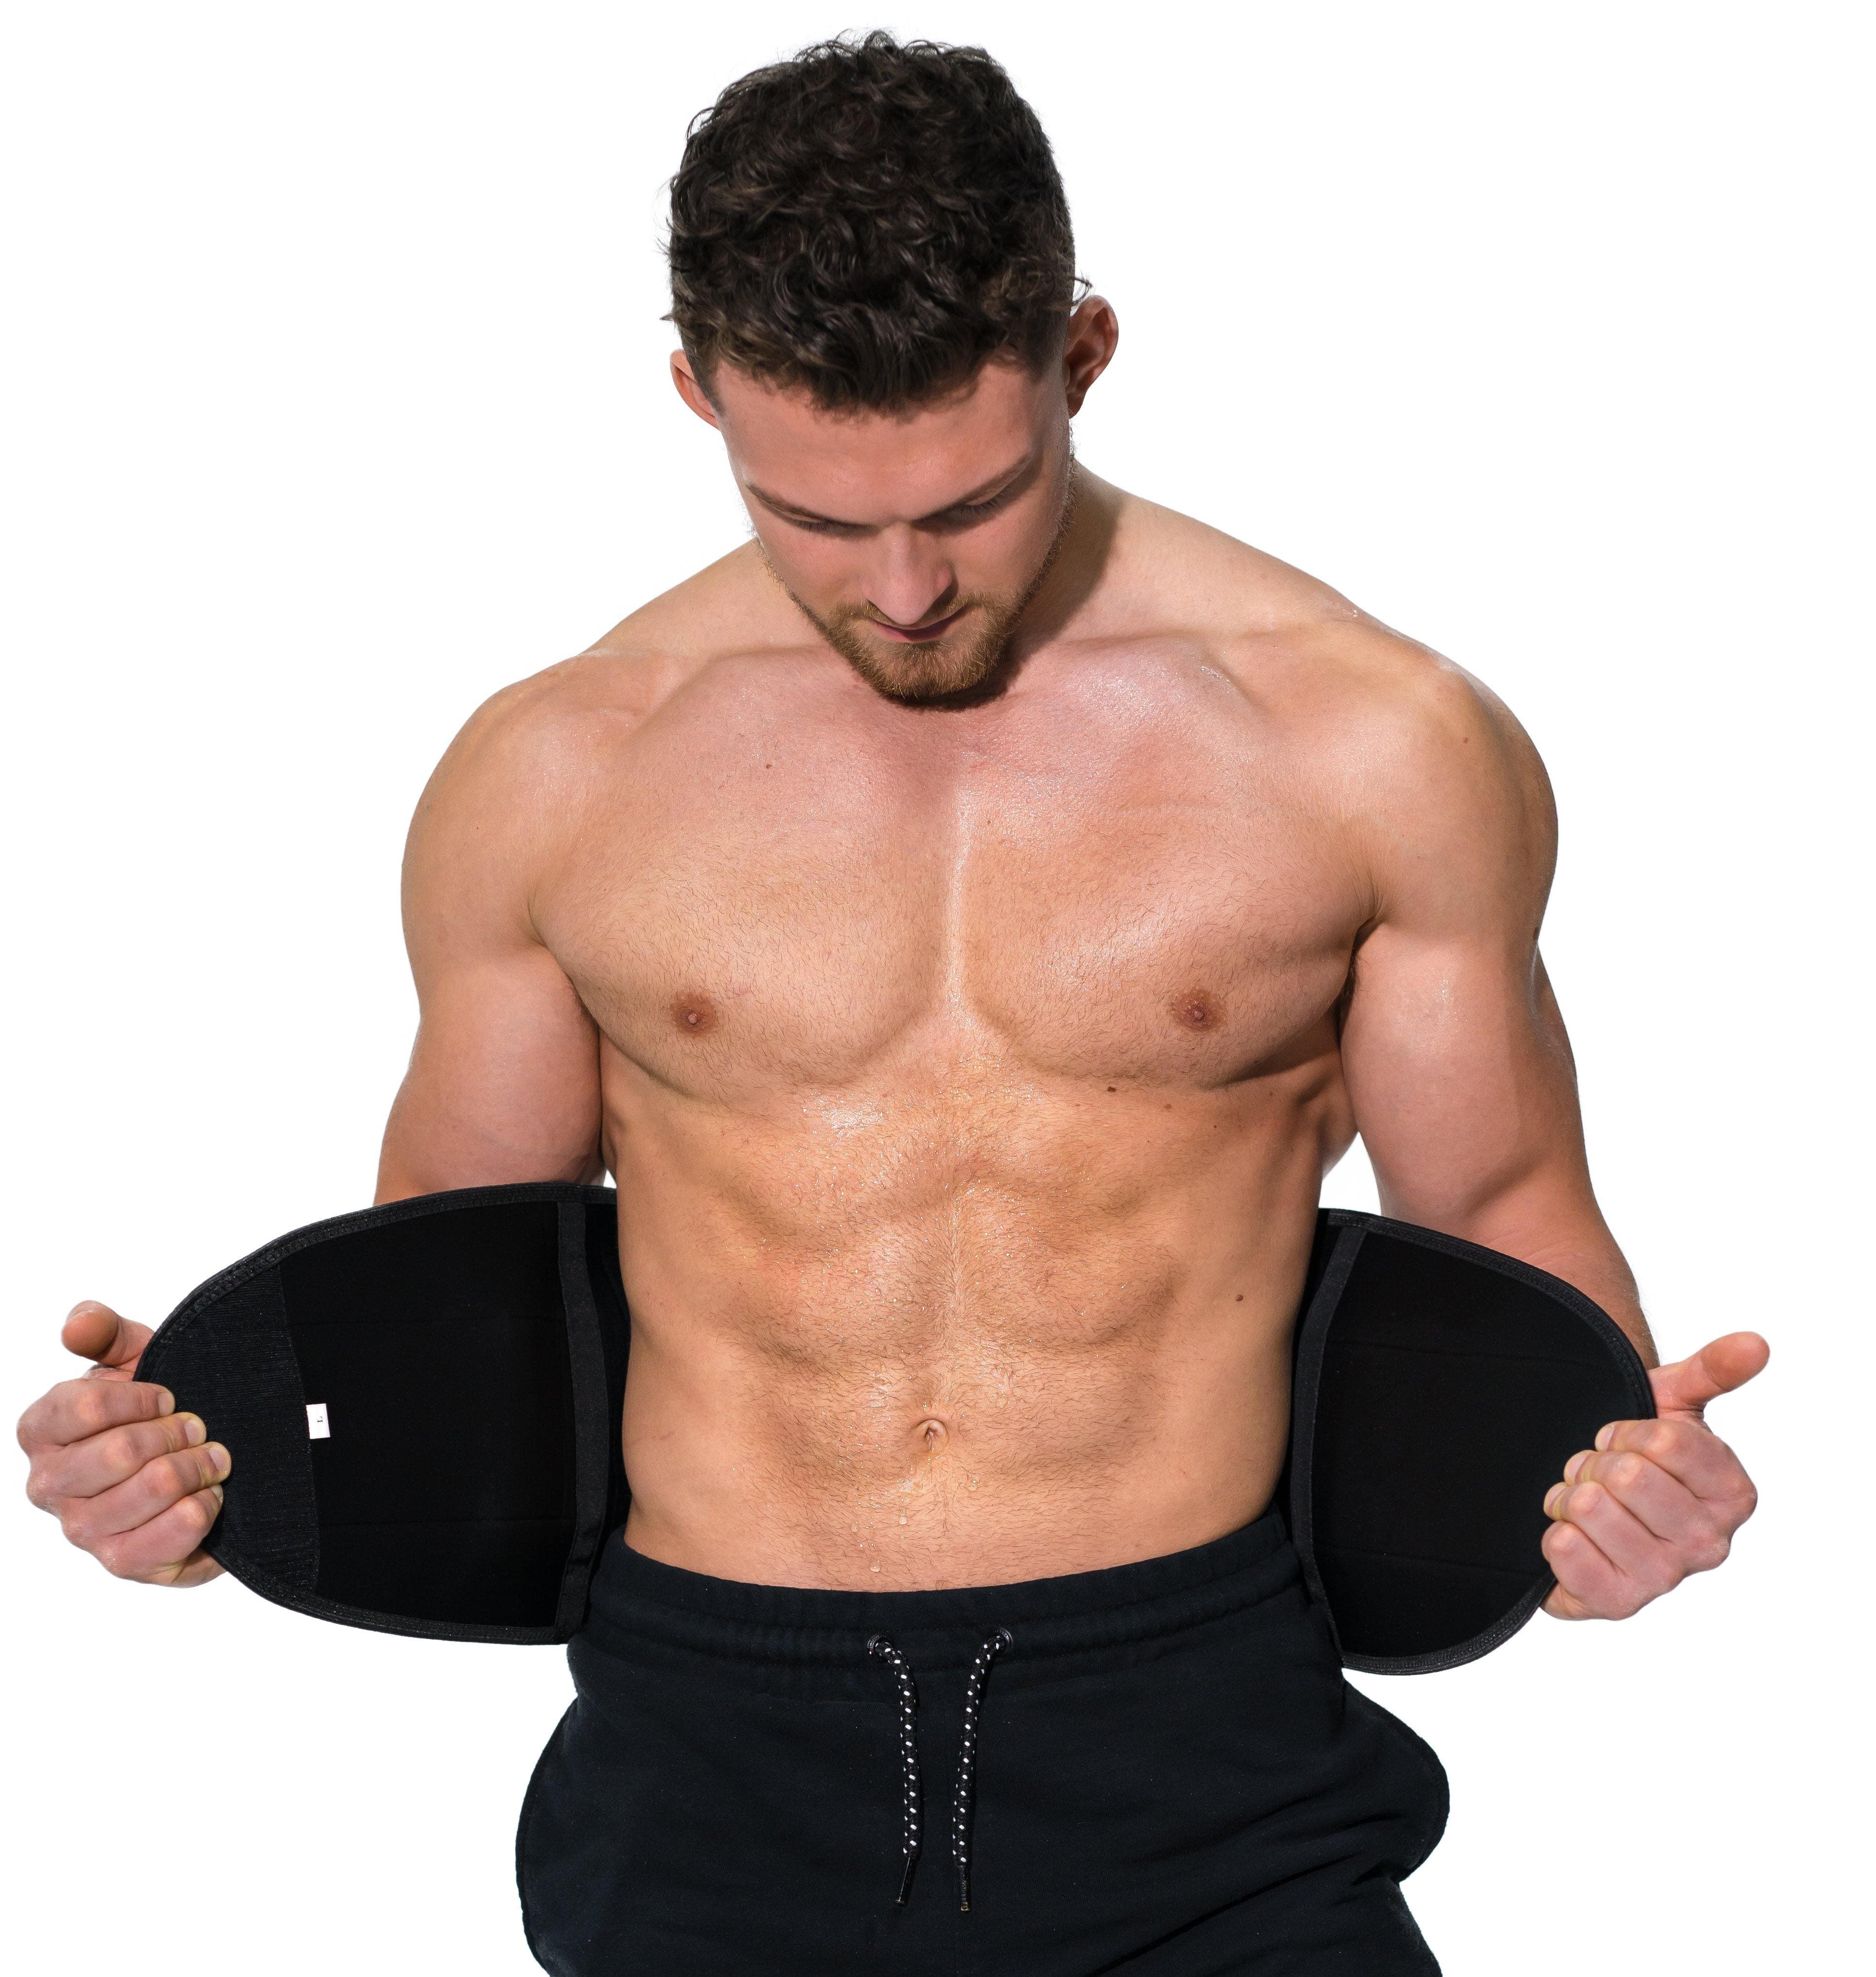 Man modeling the Redge Fit Core Focus Starter Pack Sweat Belt Available at https://www.getredge.com/products/core-focus-all-in-one-pack-1